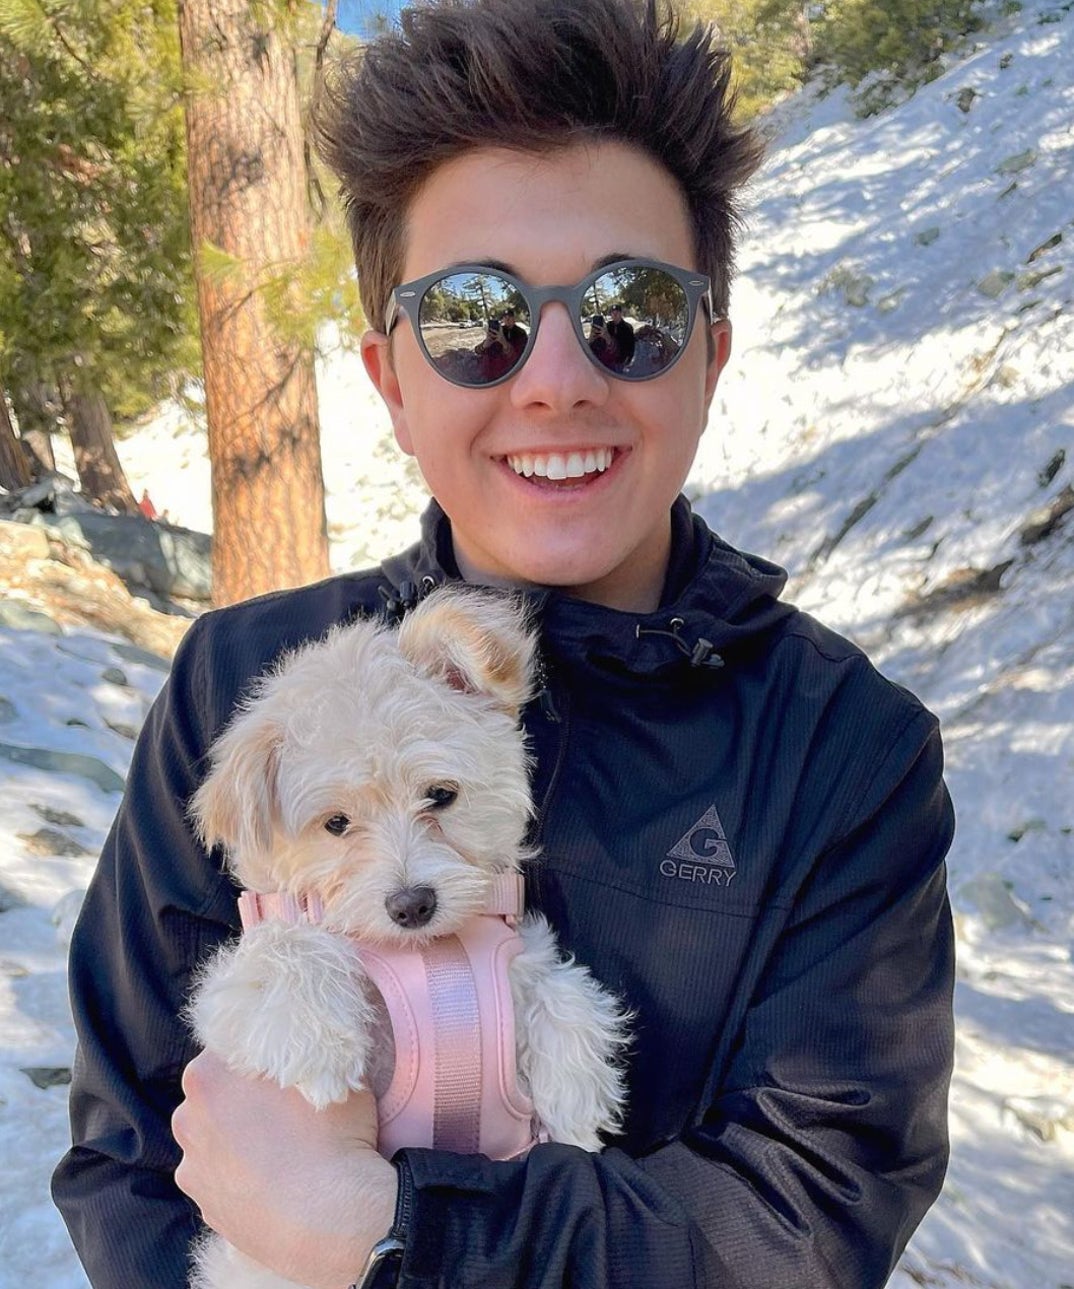 Bradley Steven Perry -- now 22 years old -- posted a selfie on social media looking ruff!